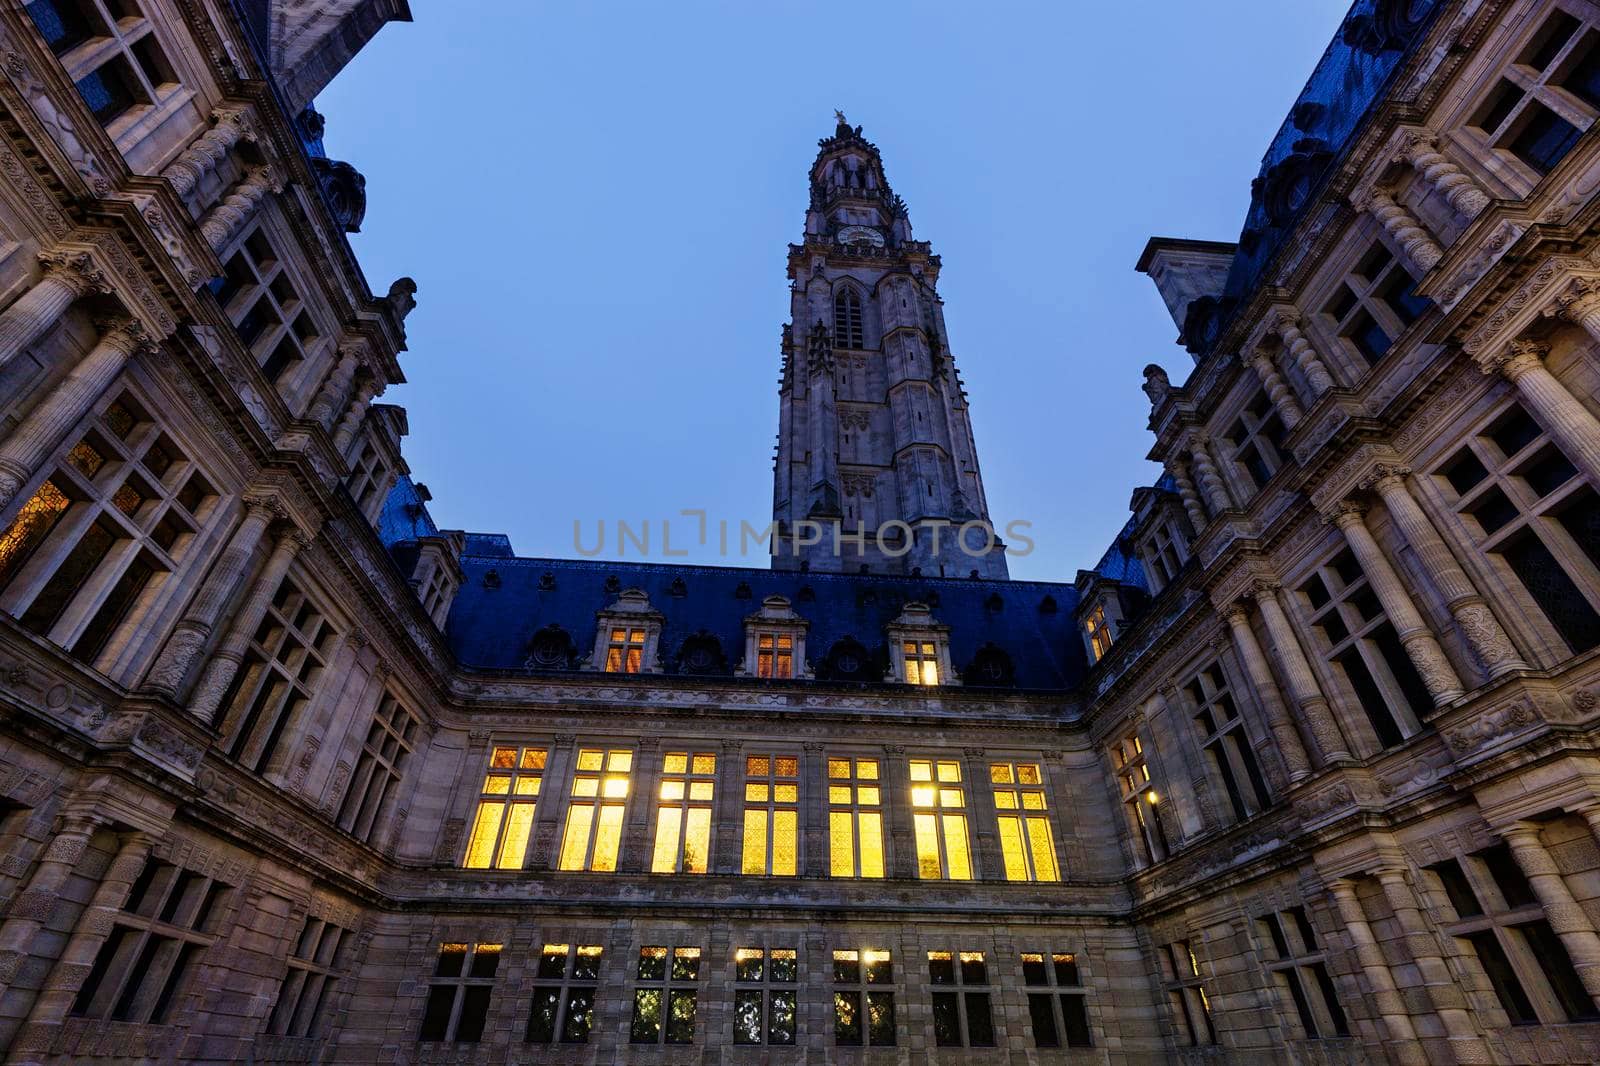 Arras Town Hall on Place des Heros by benkrut